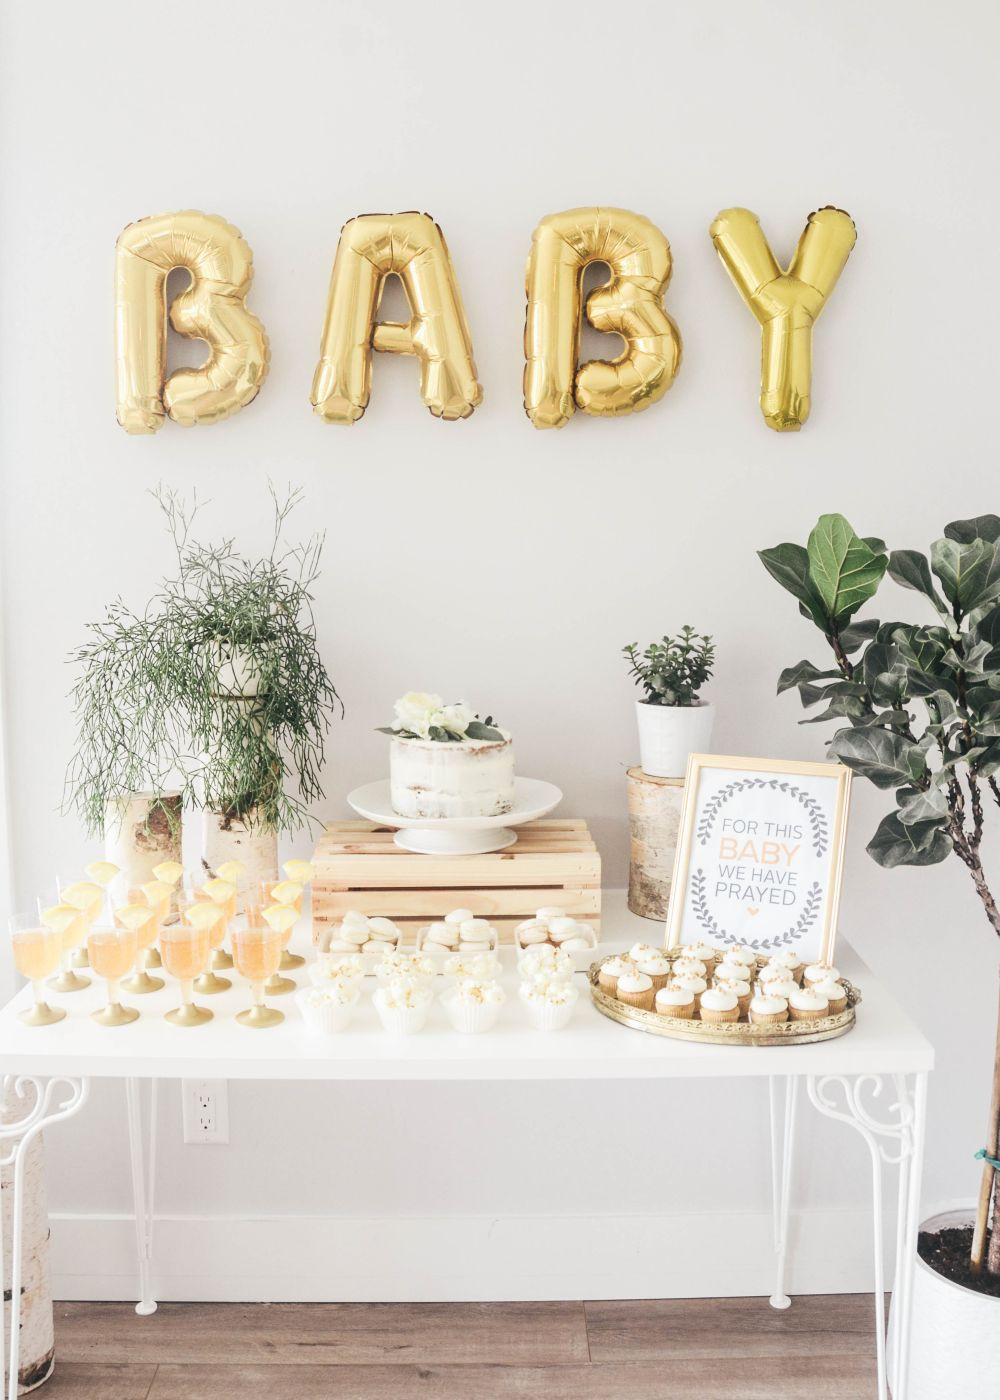 Baby Shower Wall Decoration Ideas
 15 Best Baby Shower Décor Ideas for a Memorable Celebration